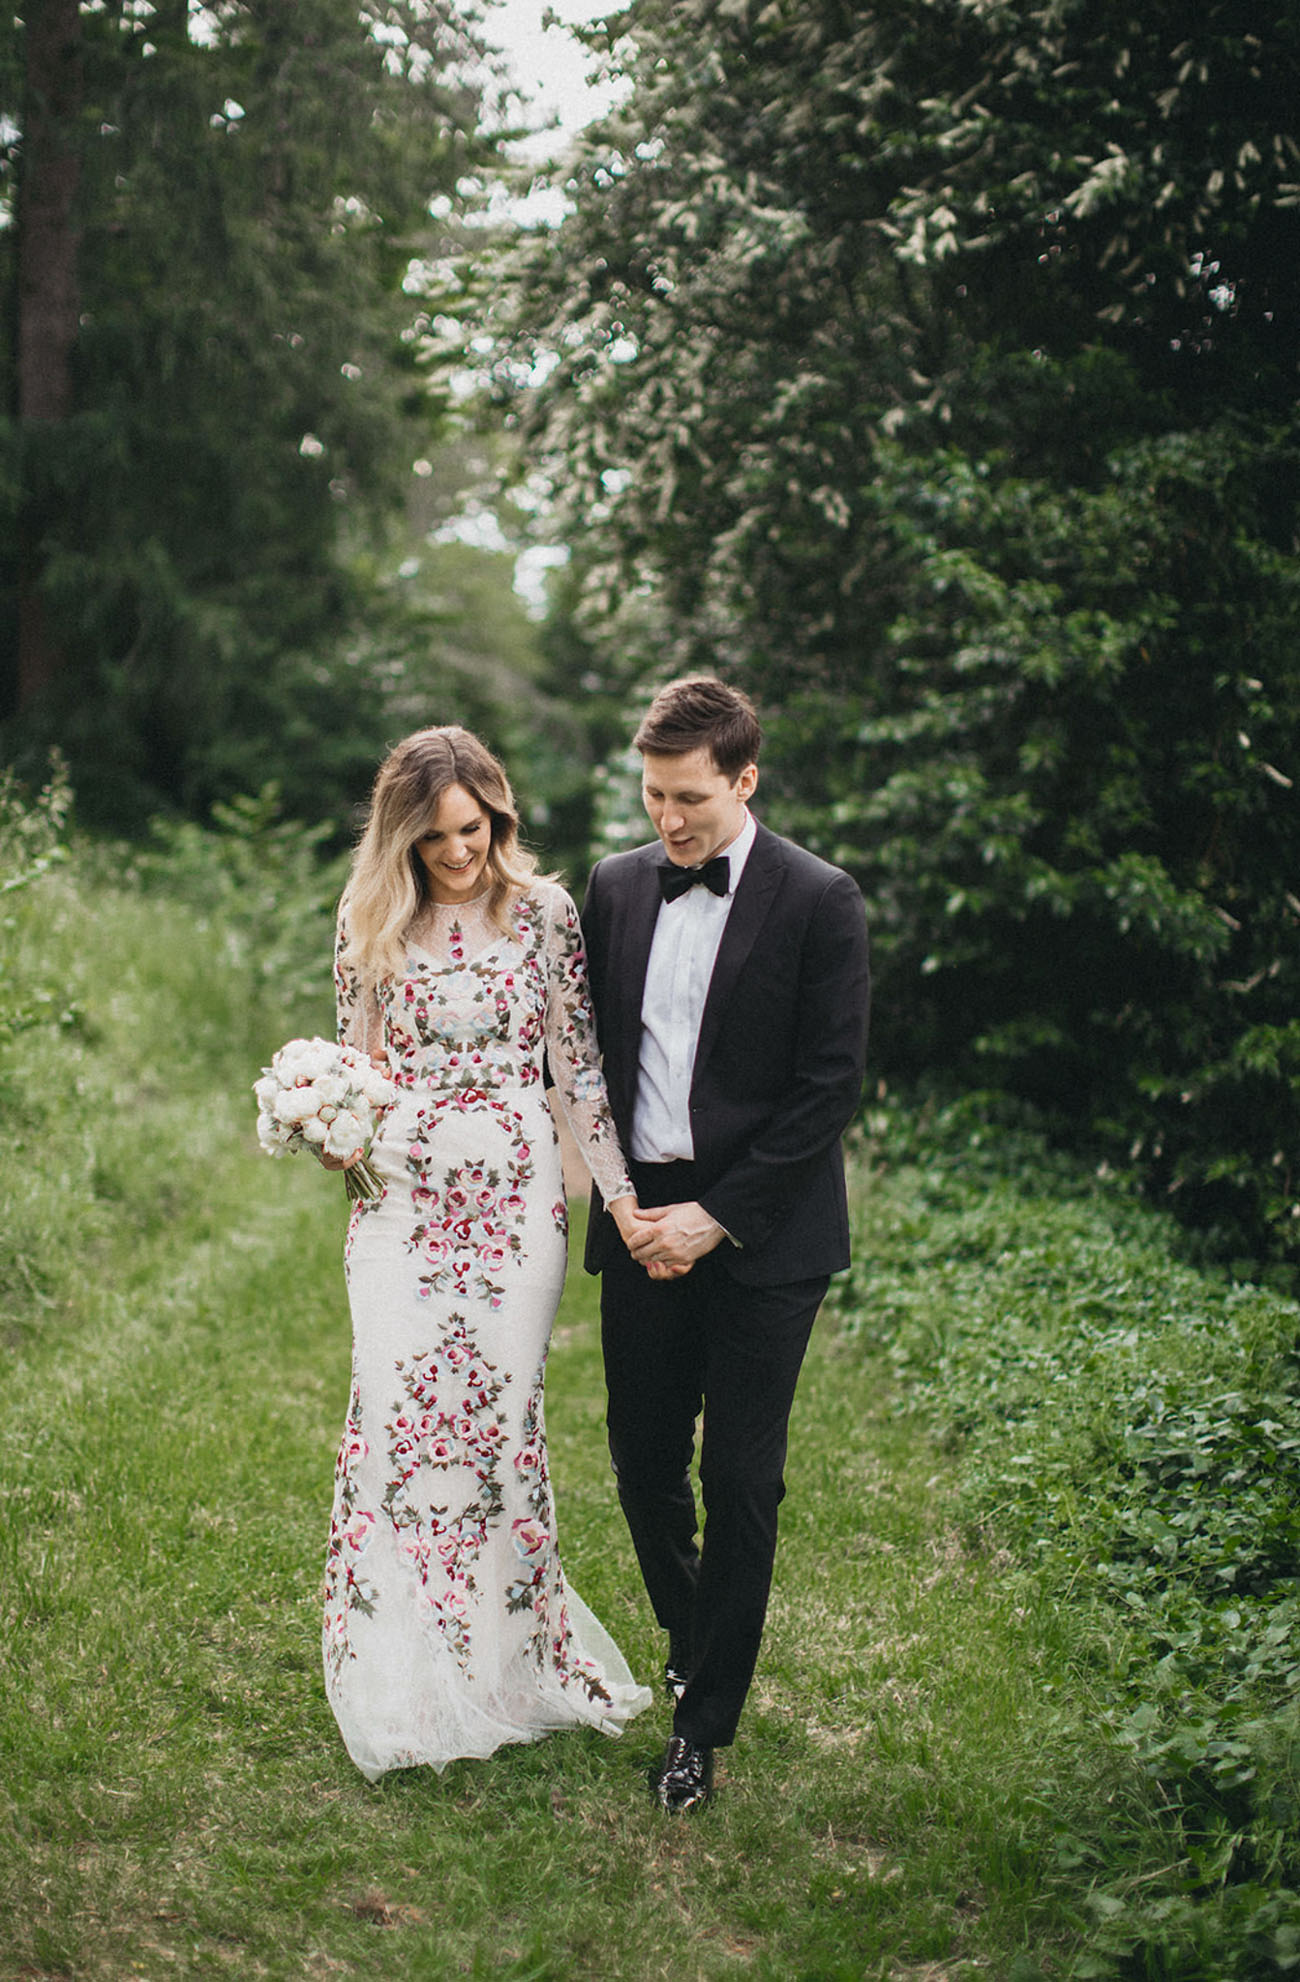 Colorful embroidered wedding dress